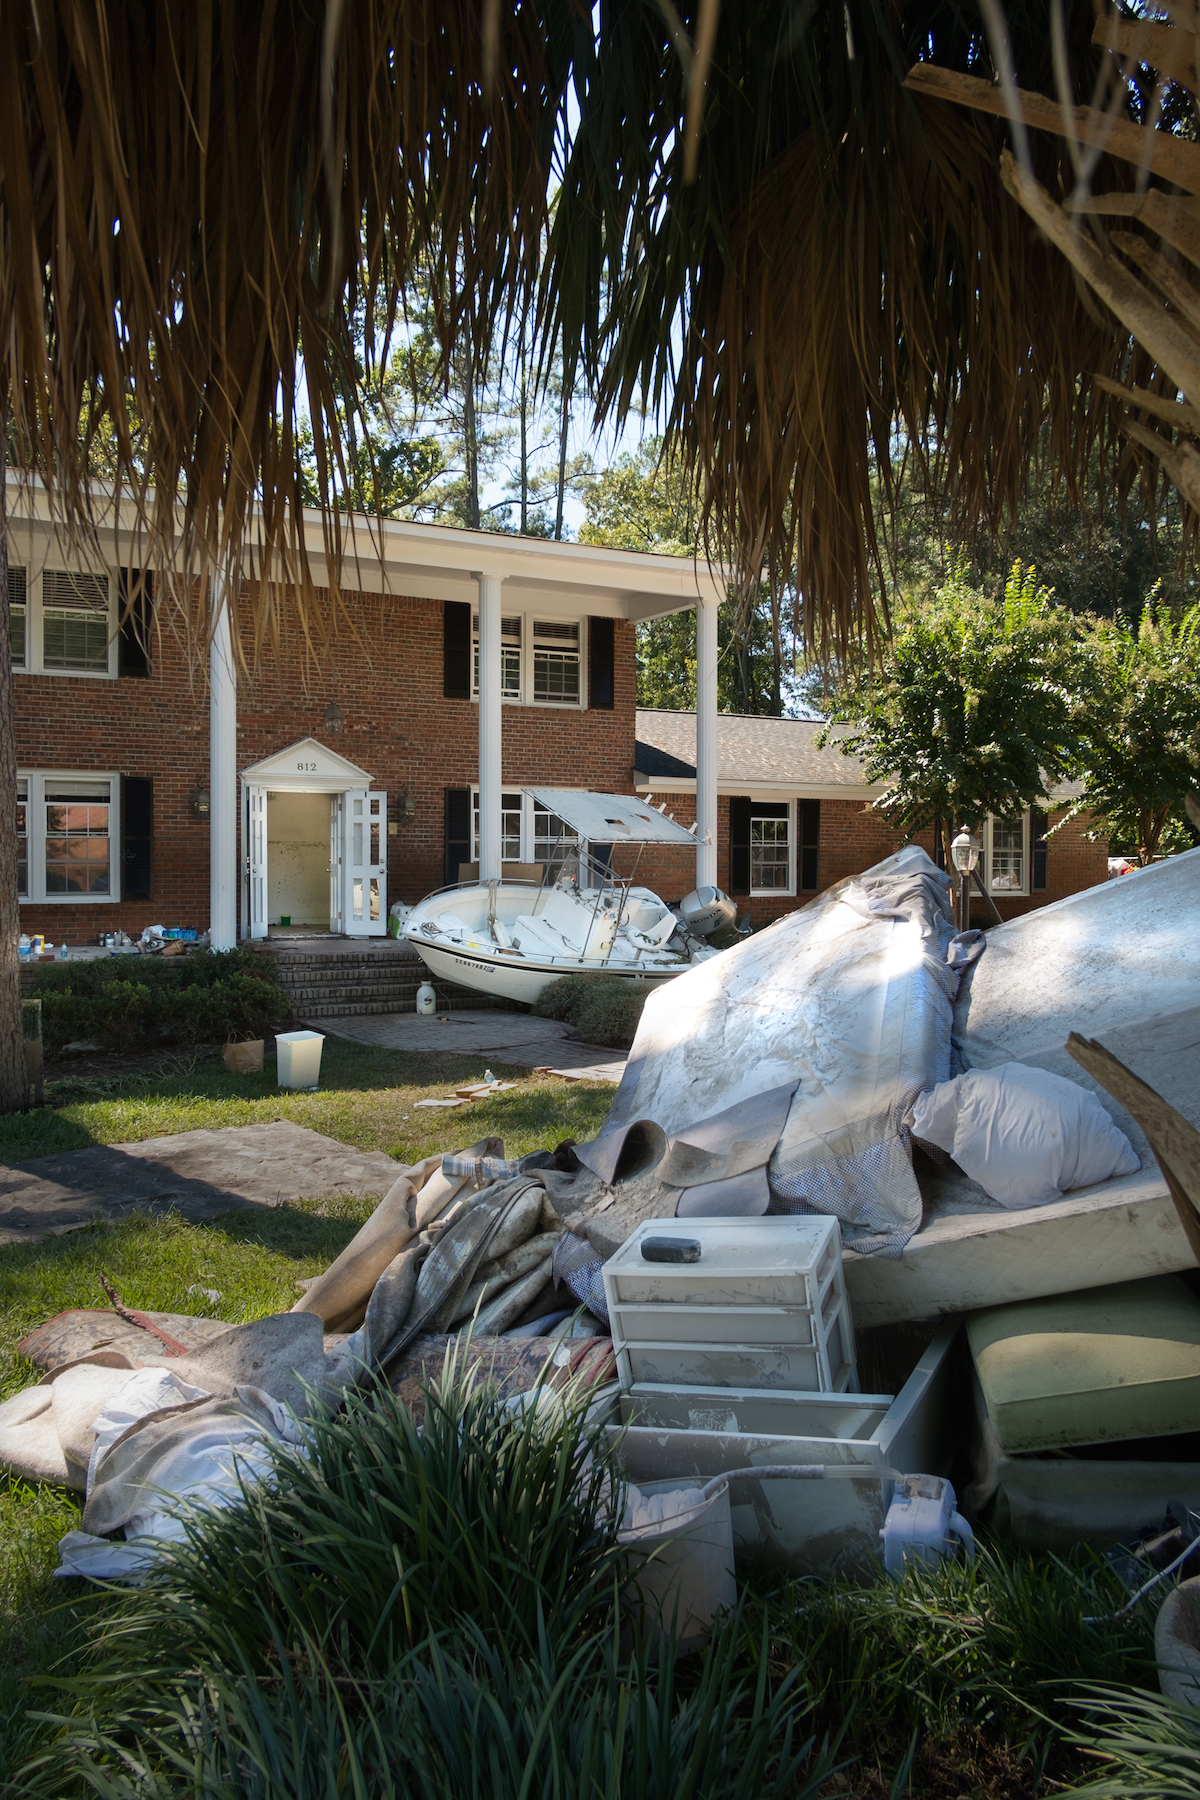 Cleanup continues on Burwell St. in Columbia, S.C., where homes were flooded to the rooftops on Oct. 4, 2015. Photo: Jeff Amberg